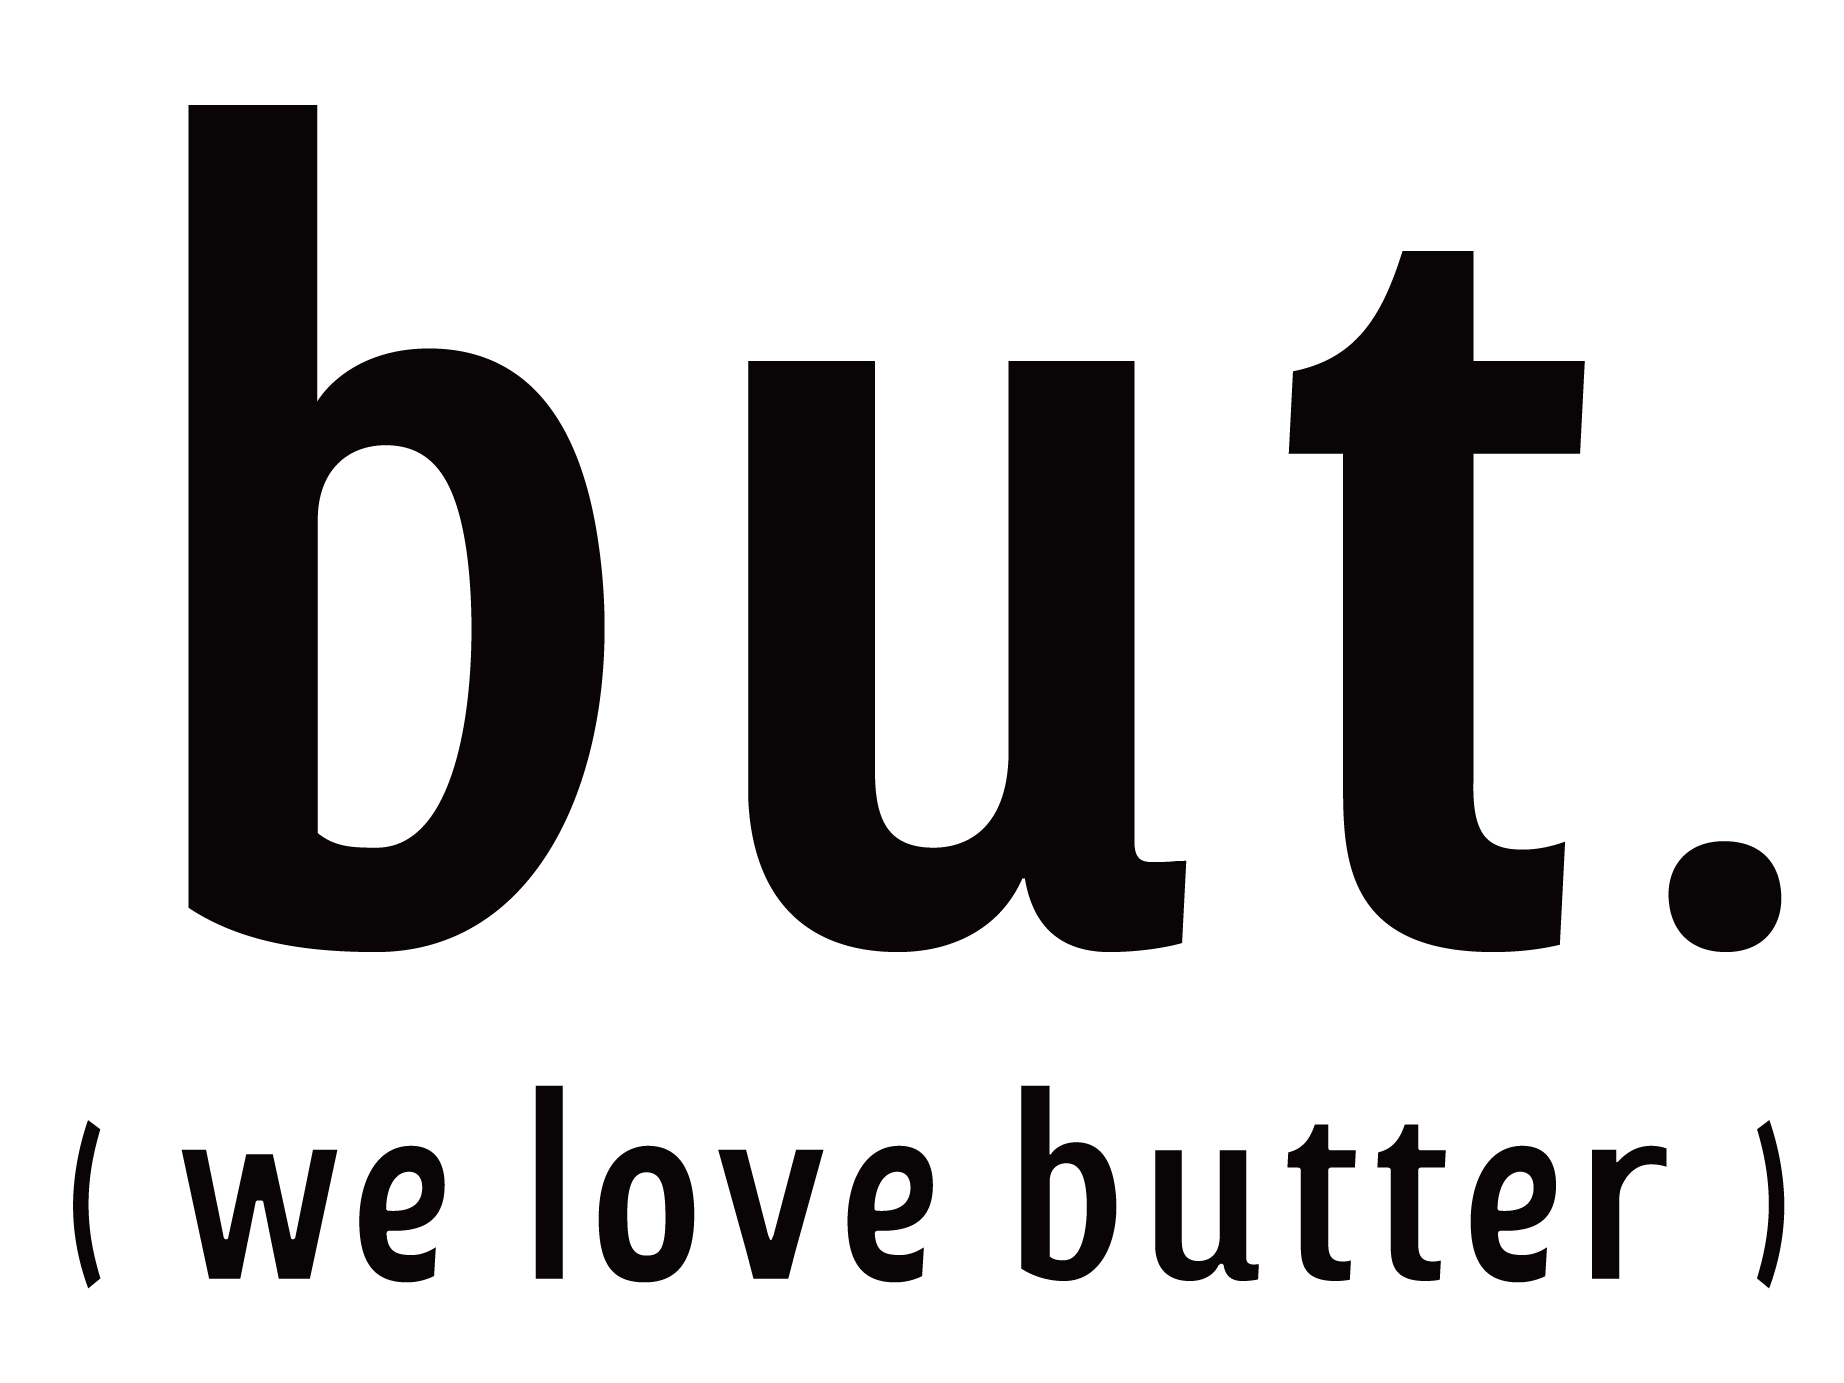 BUT. WE LOVE BUTTER